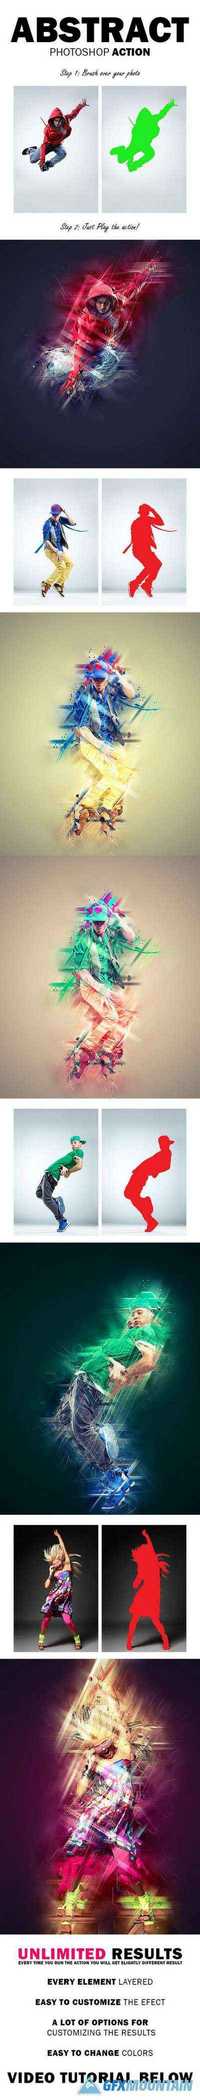 GraphicRiver - Abstract Photoshop Action 12688521